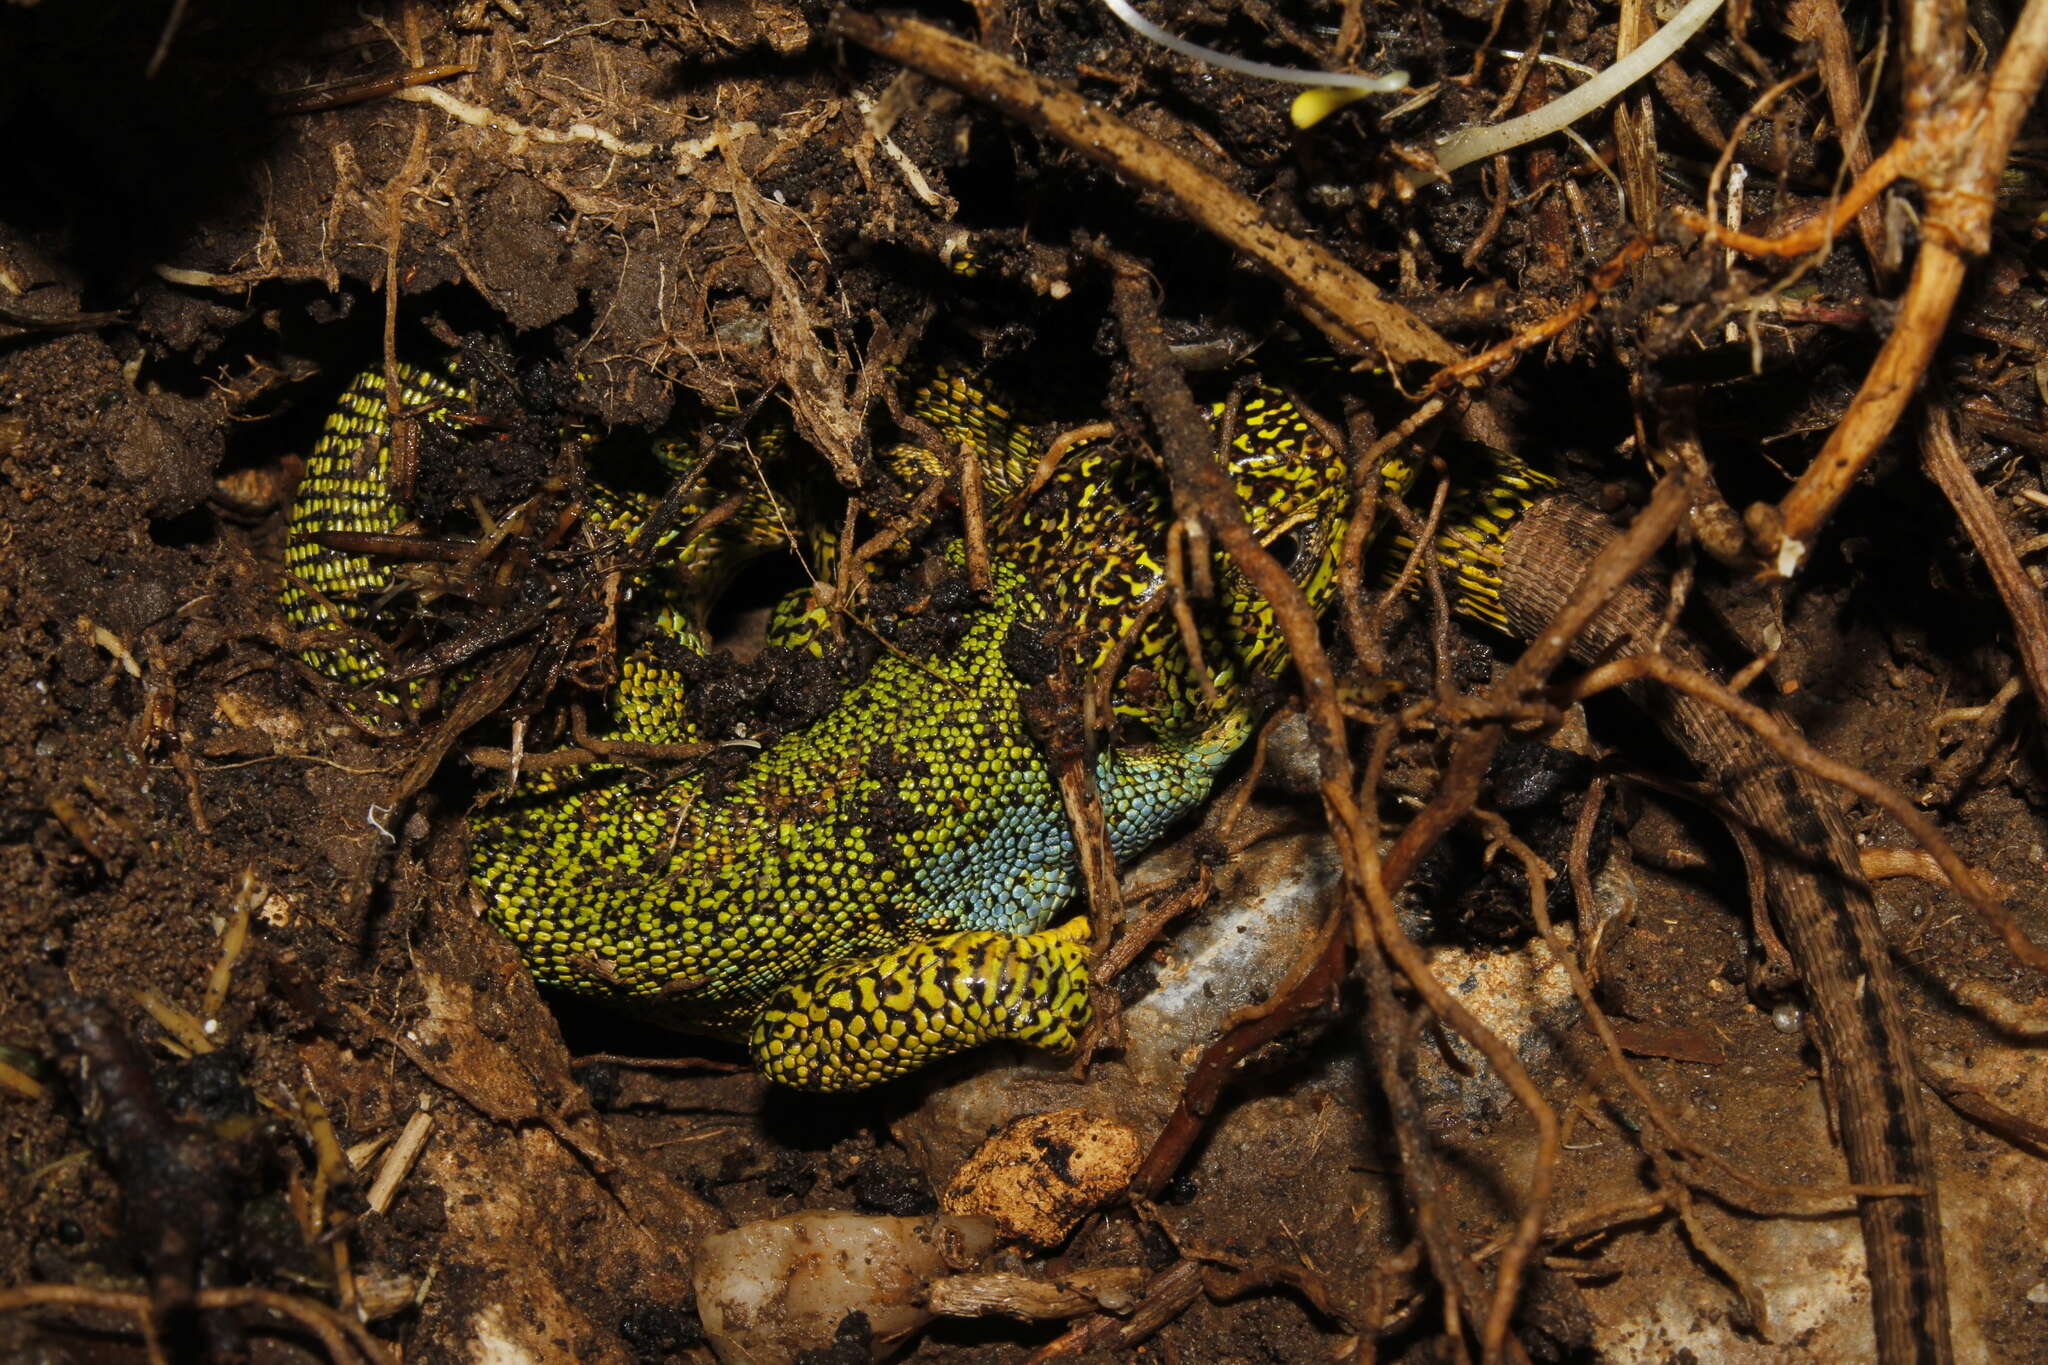 Image of Lacerta diplochondrodes cariensis